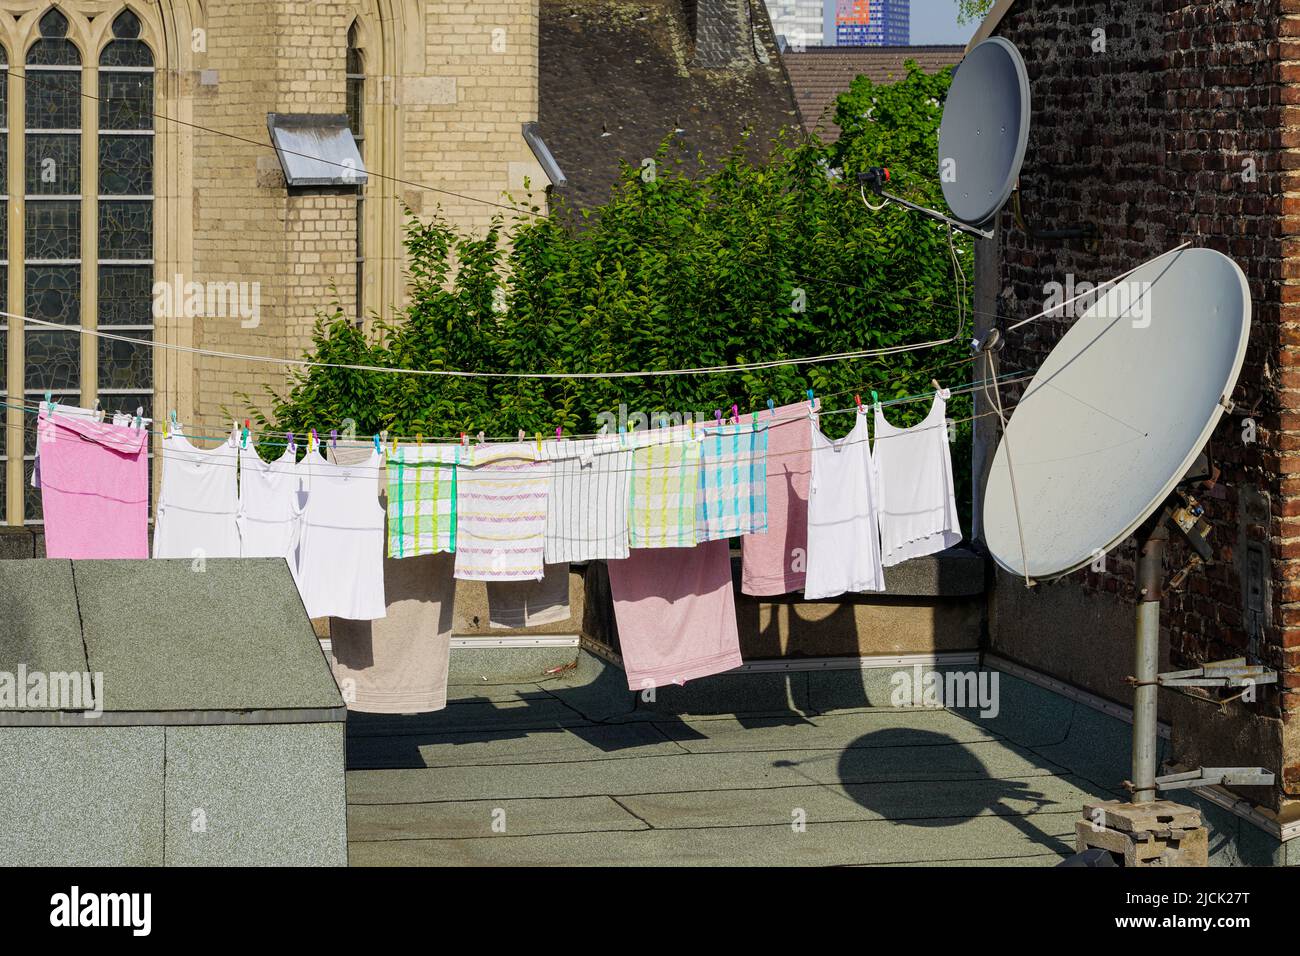 On the roof of an old building in Cologne, residents hang laundry to dry. Cologne, North Rhine-Westphalia, Germany, 22.5.22 Stock Photo